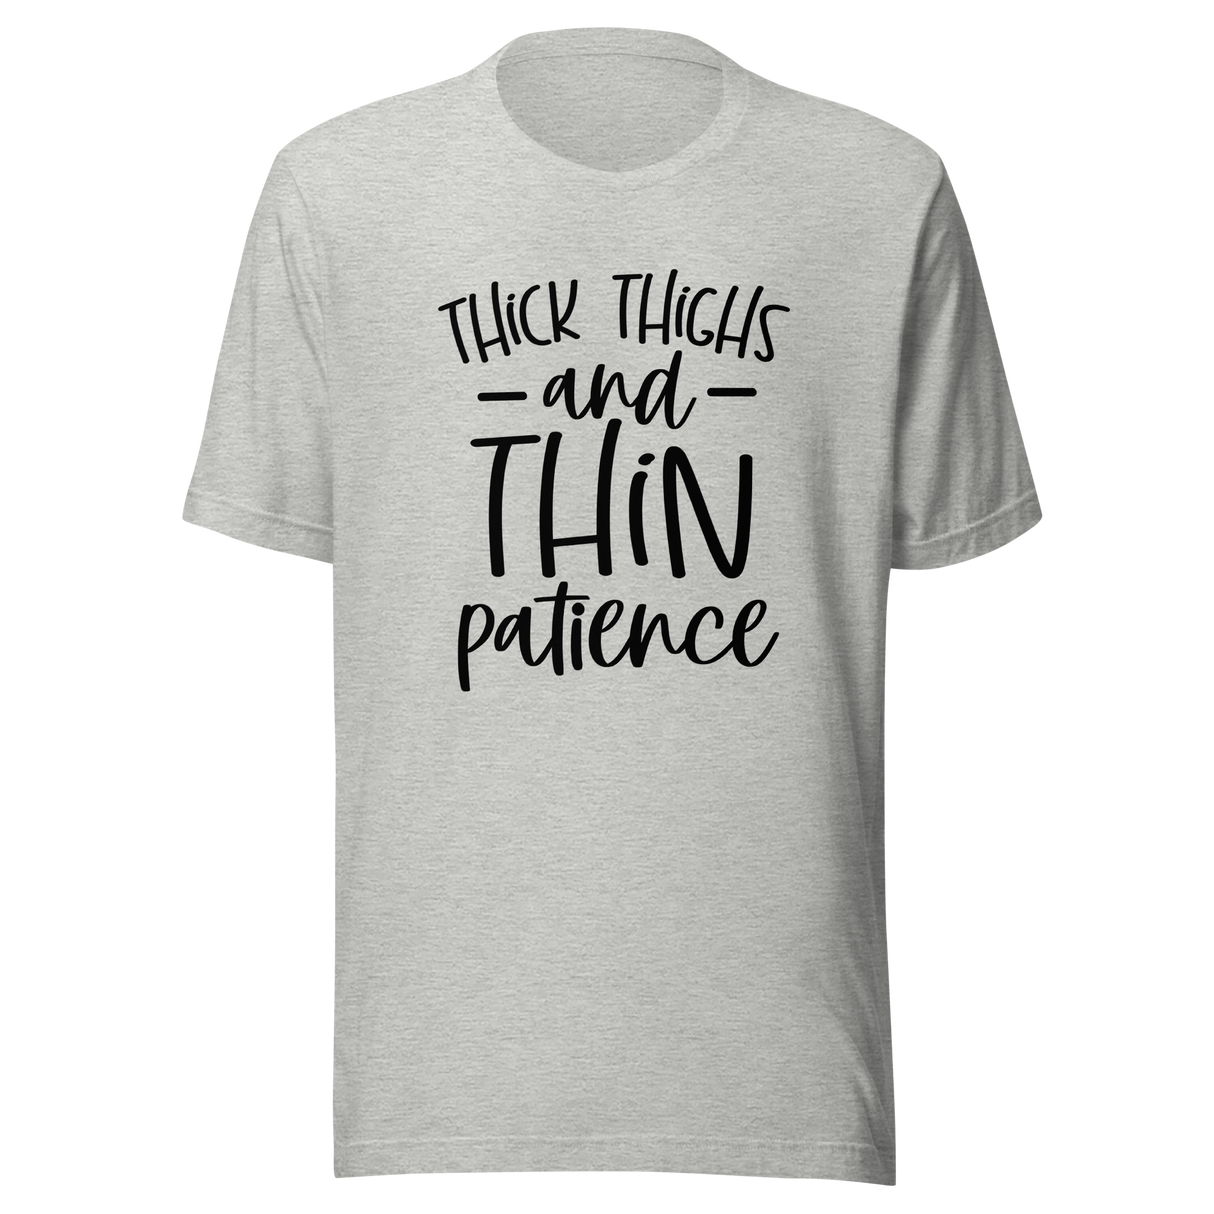 thick-thighs-and-thin-patience-positivity-tee-thick-thighs-t-shirt-patience-tee-t-shirt-tee#color_athletic-heather